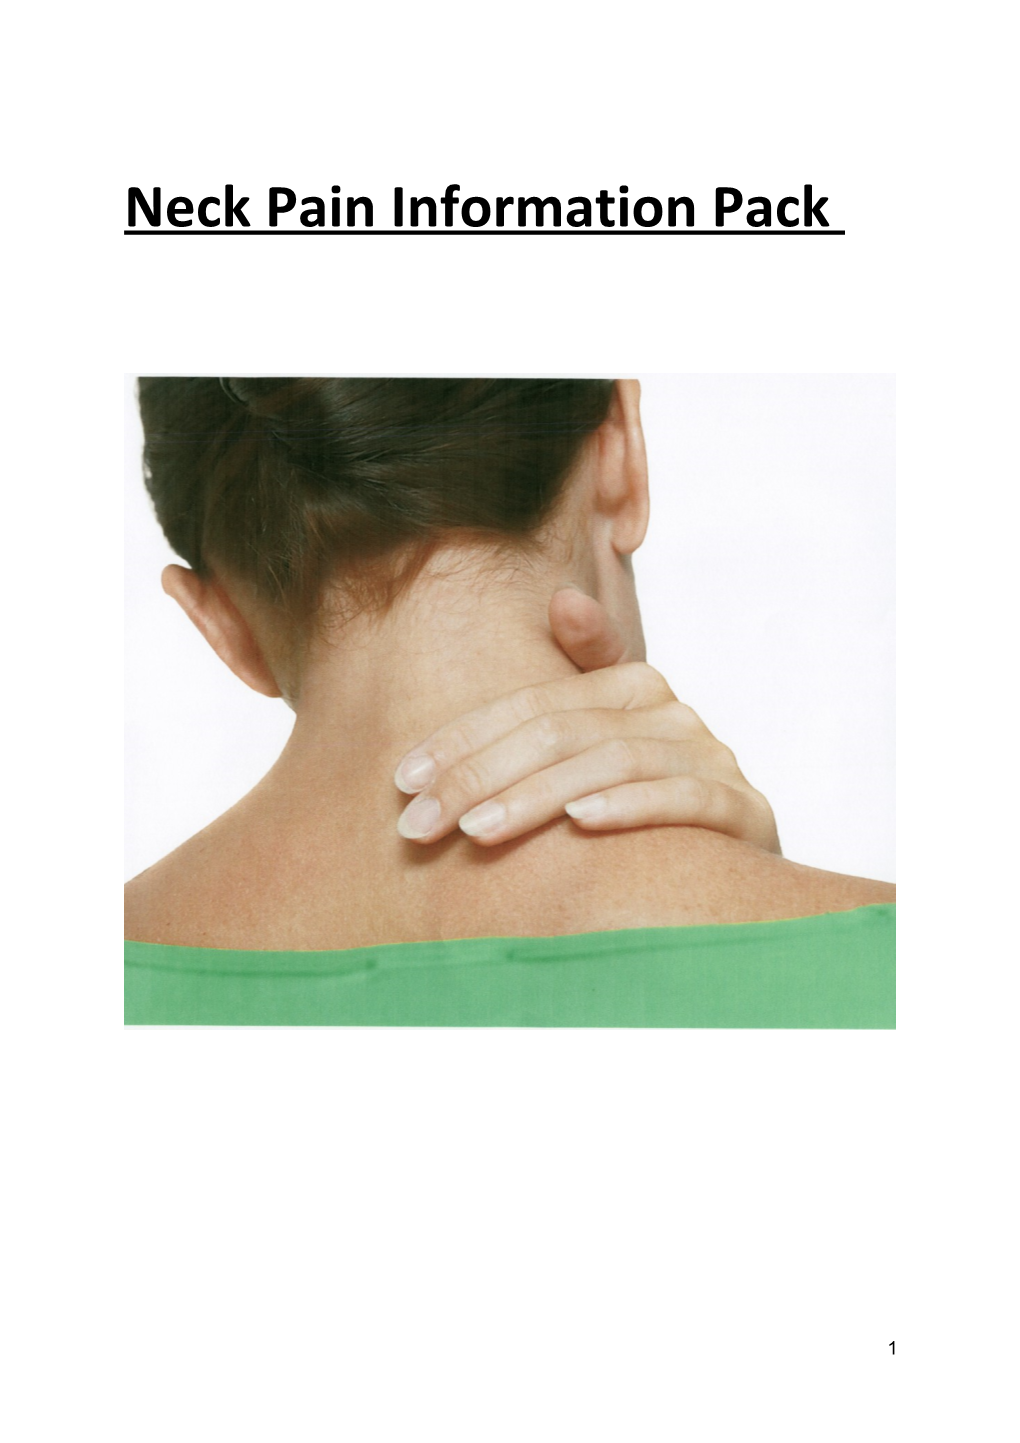 Neck Pain Information Pack